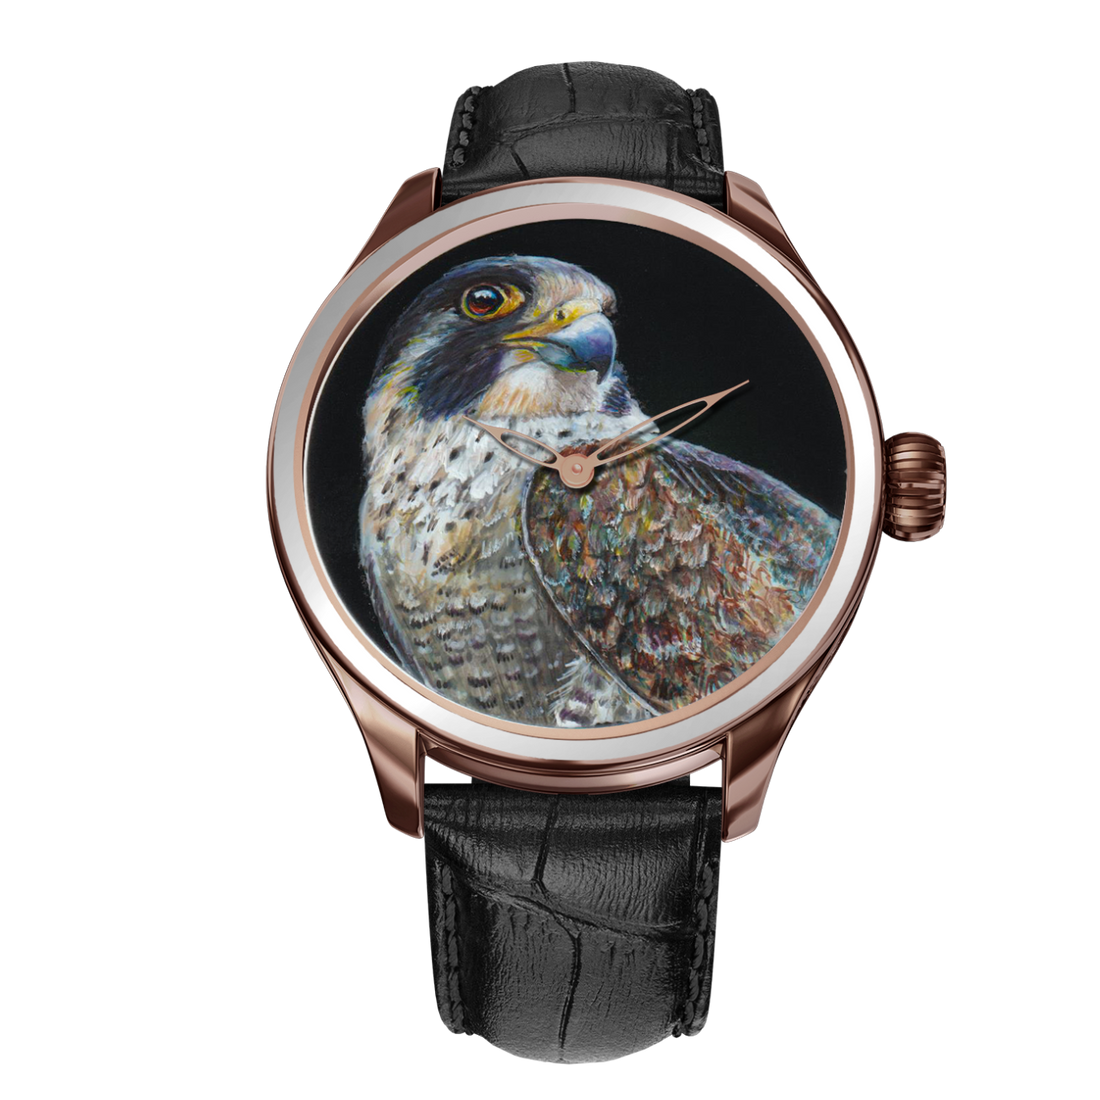 A collection of exquisite B360 wristwatches from the B Unique line, each featuring intricate hand-painted designs that pay tribute to the beauty and majesty of falcons. These unique timepieces are bespoke works of art, reflecting the individuality and style of their wearers